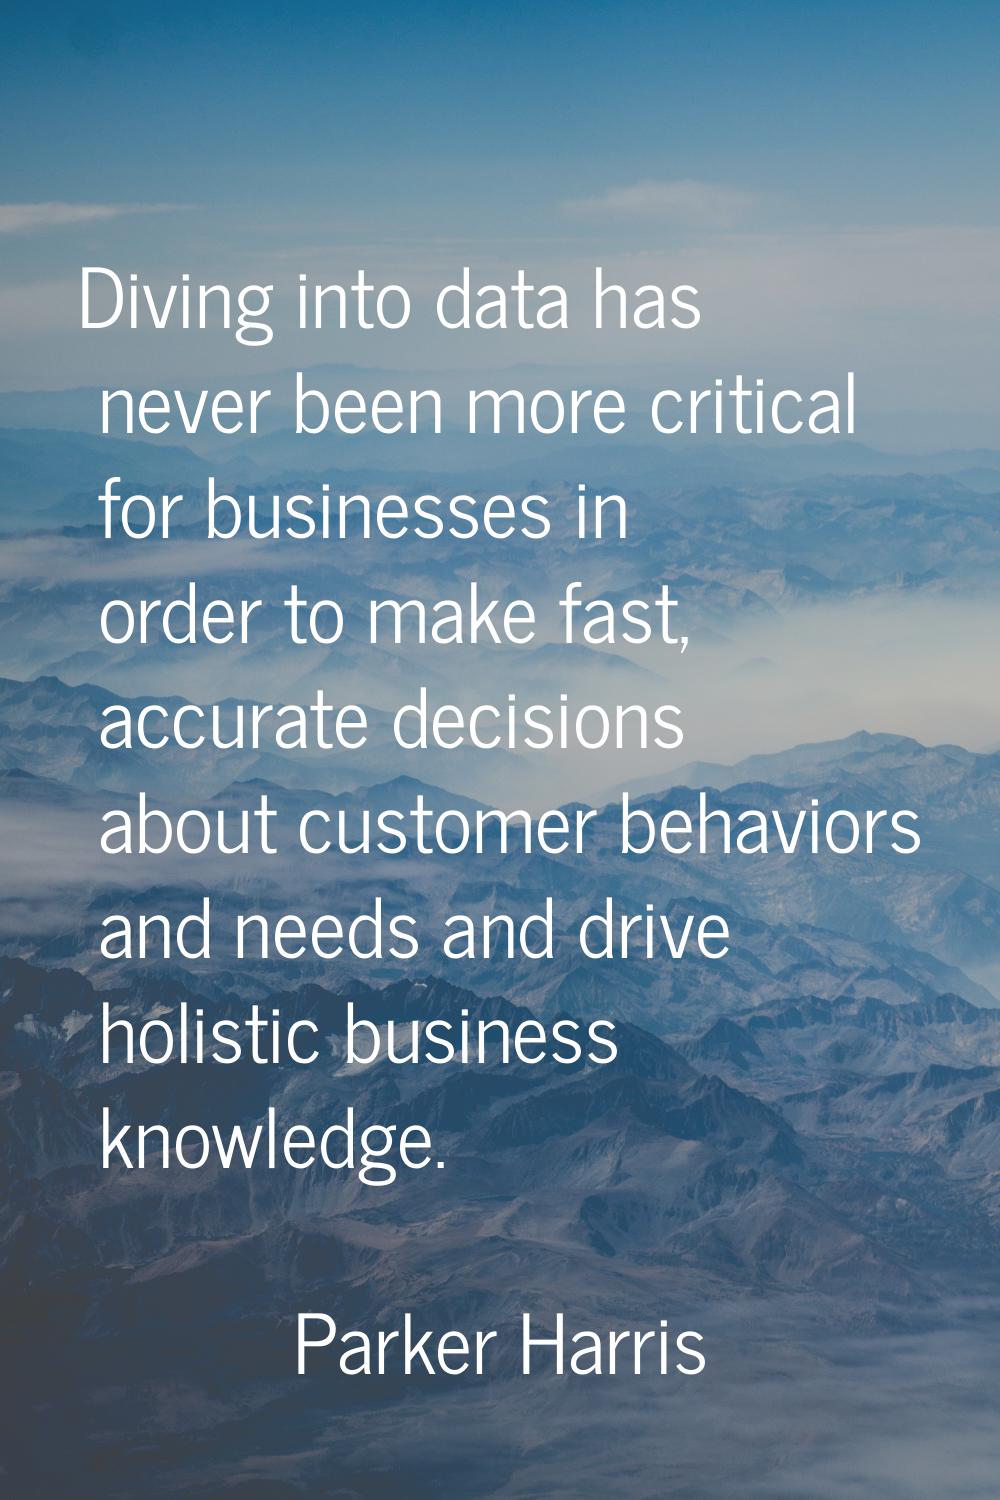 Diving into data has never been more critical for businesses in order to make fast, accurate decisi